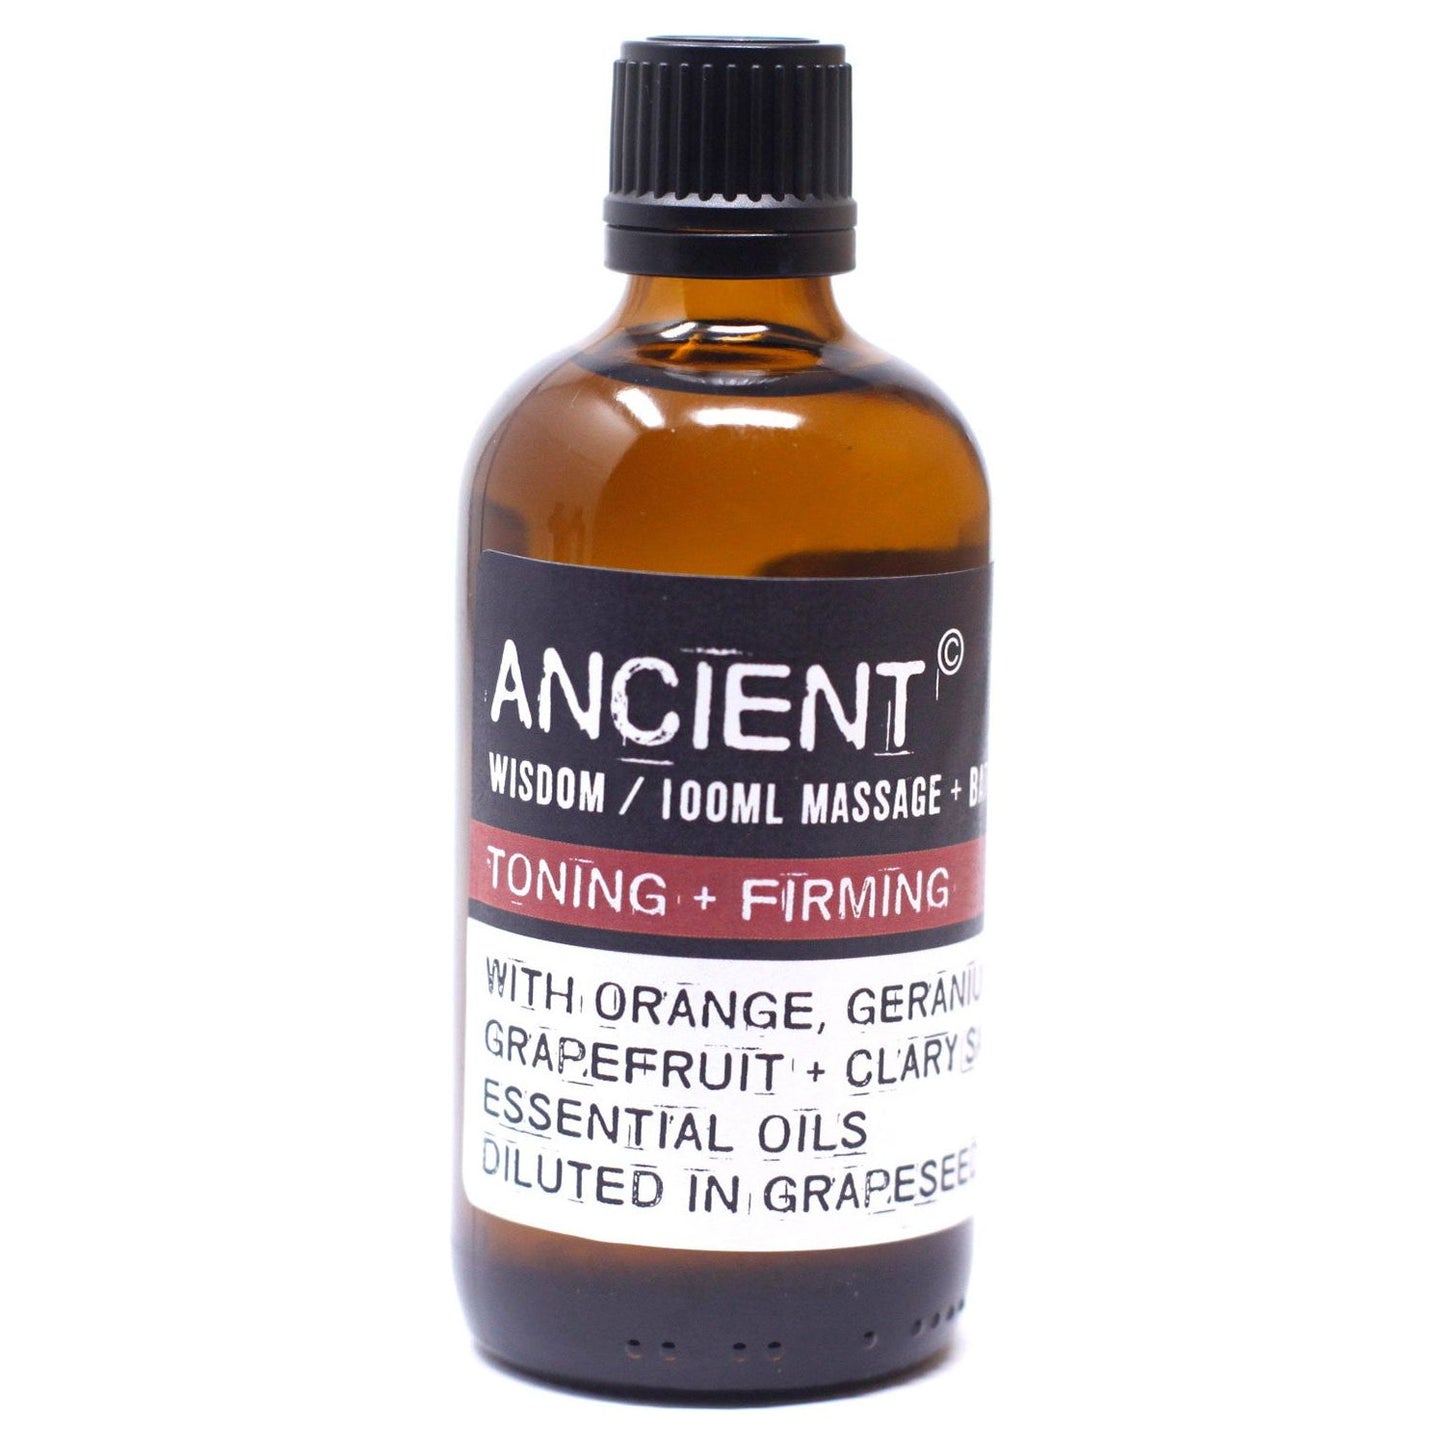 Toning & Firming Massage Oil - 100ml - Ashton and Finch